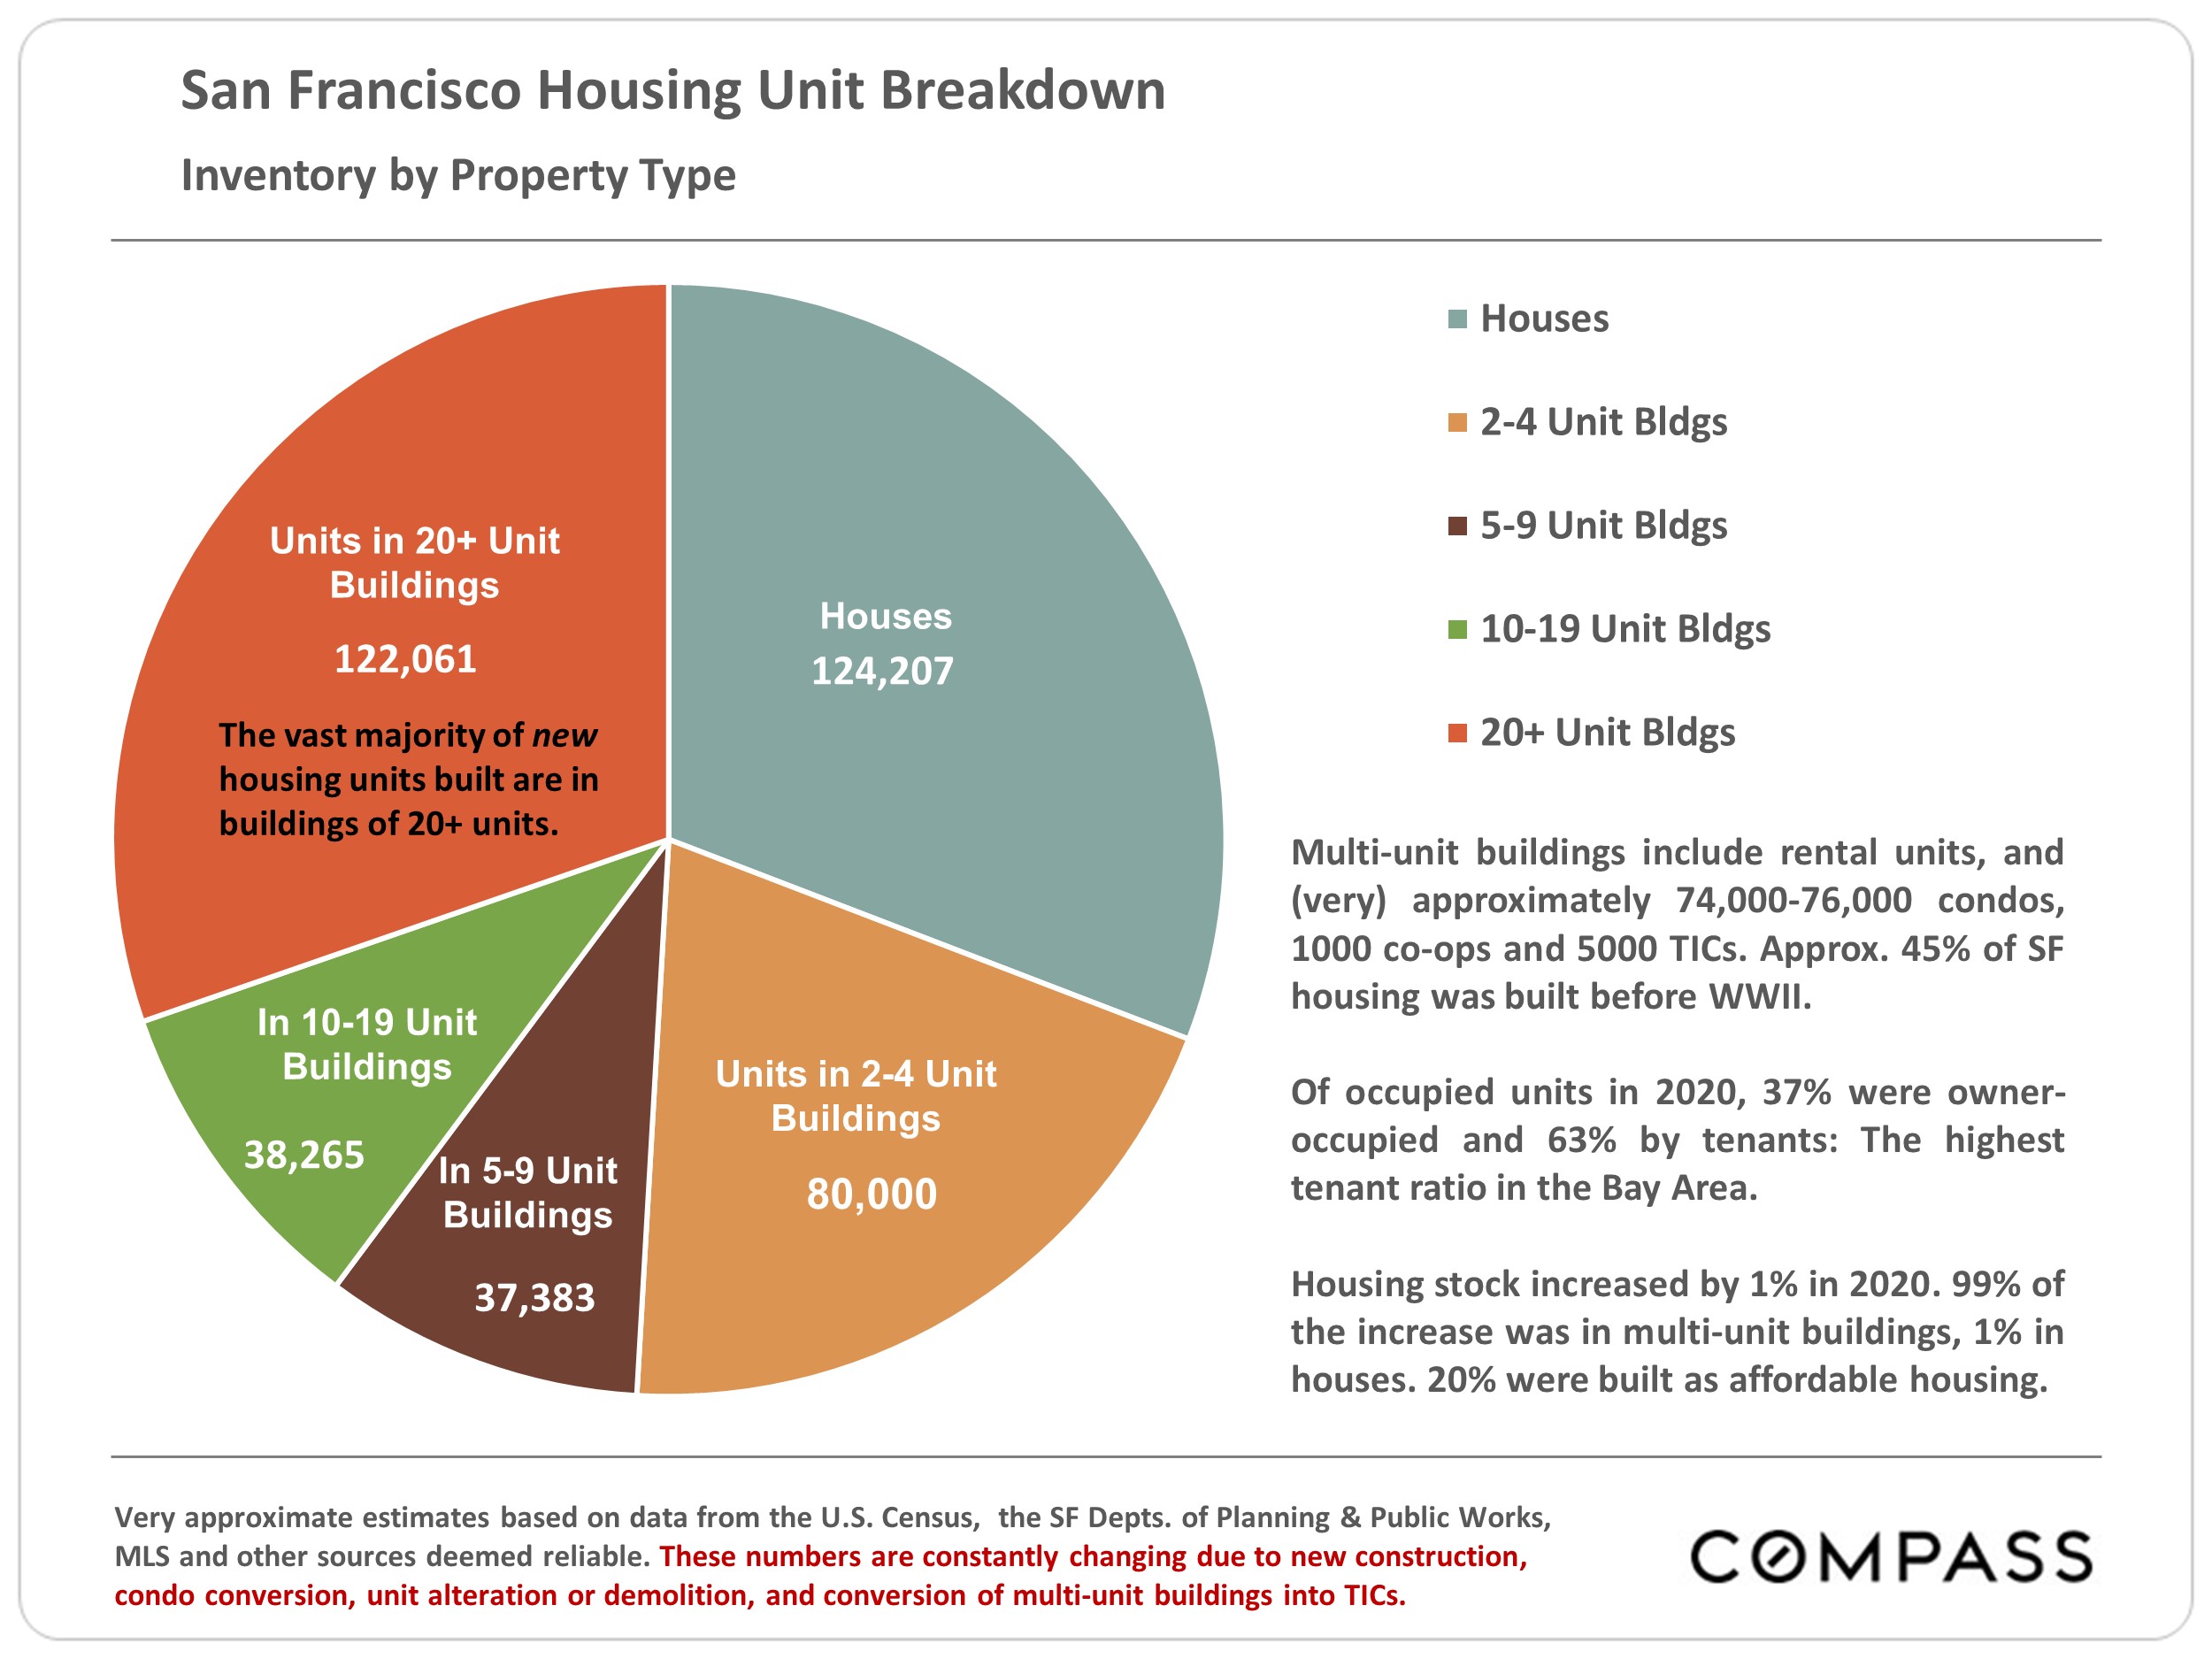 Chart showing the San Francisco Housing Unit Breakdown, Inventory by Property Type